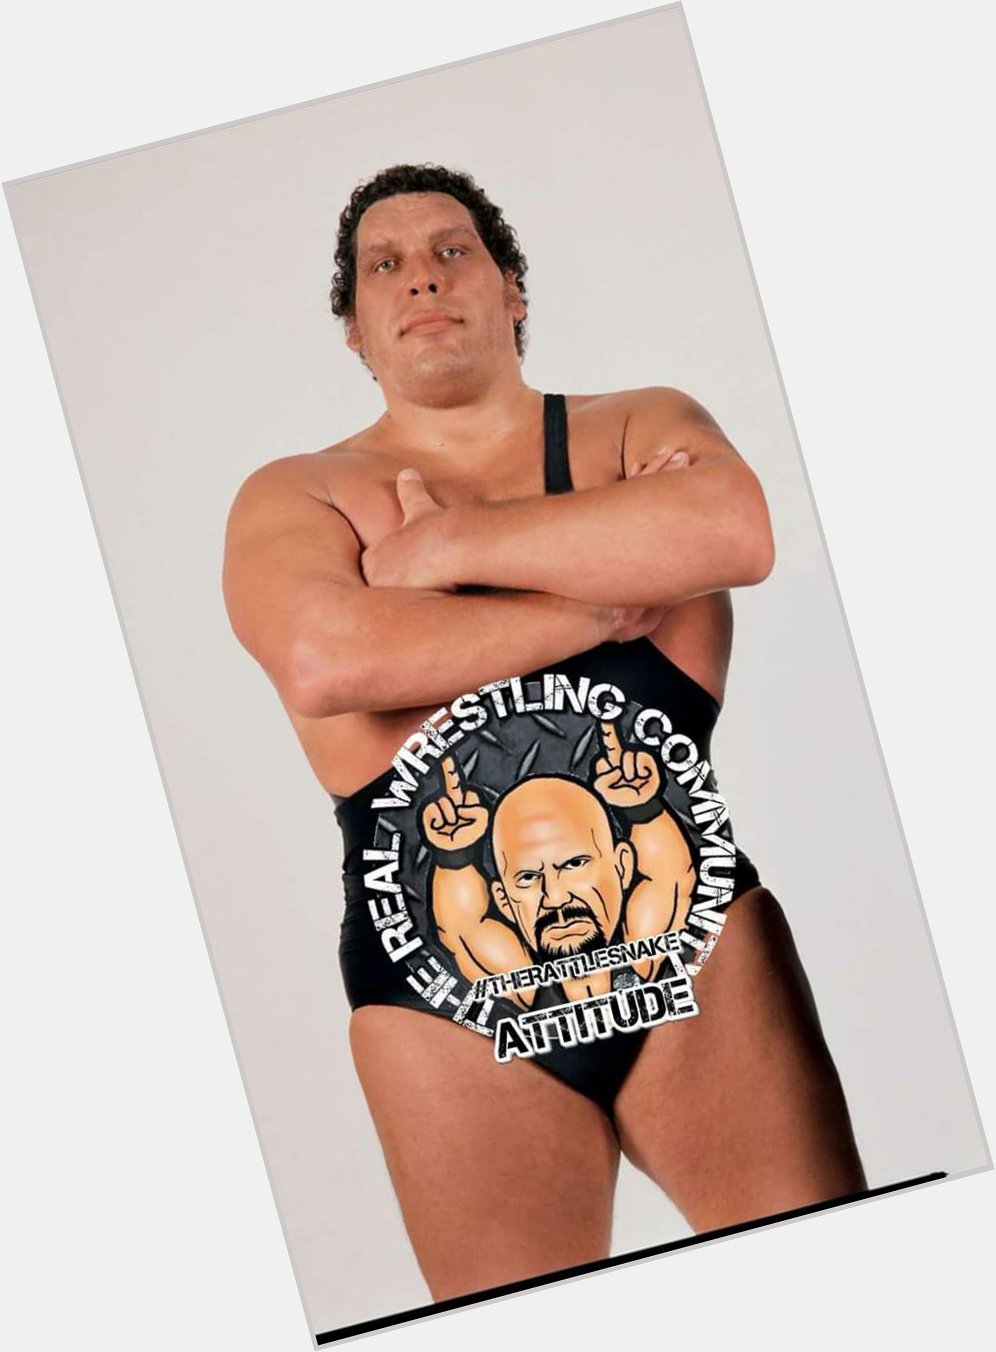 Andre the Giant would have turned 72 years old today. Happy birthday to the legend! 